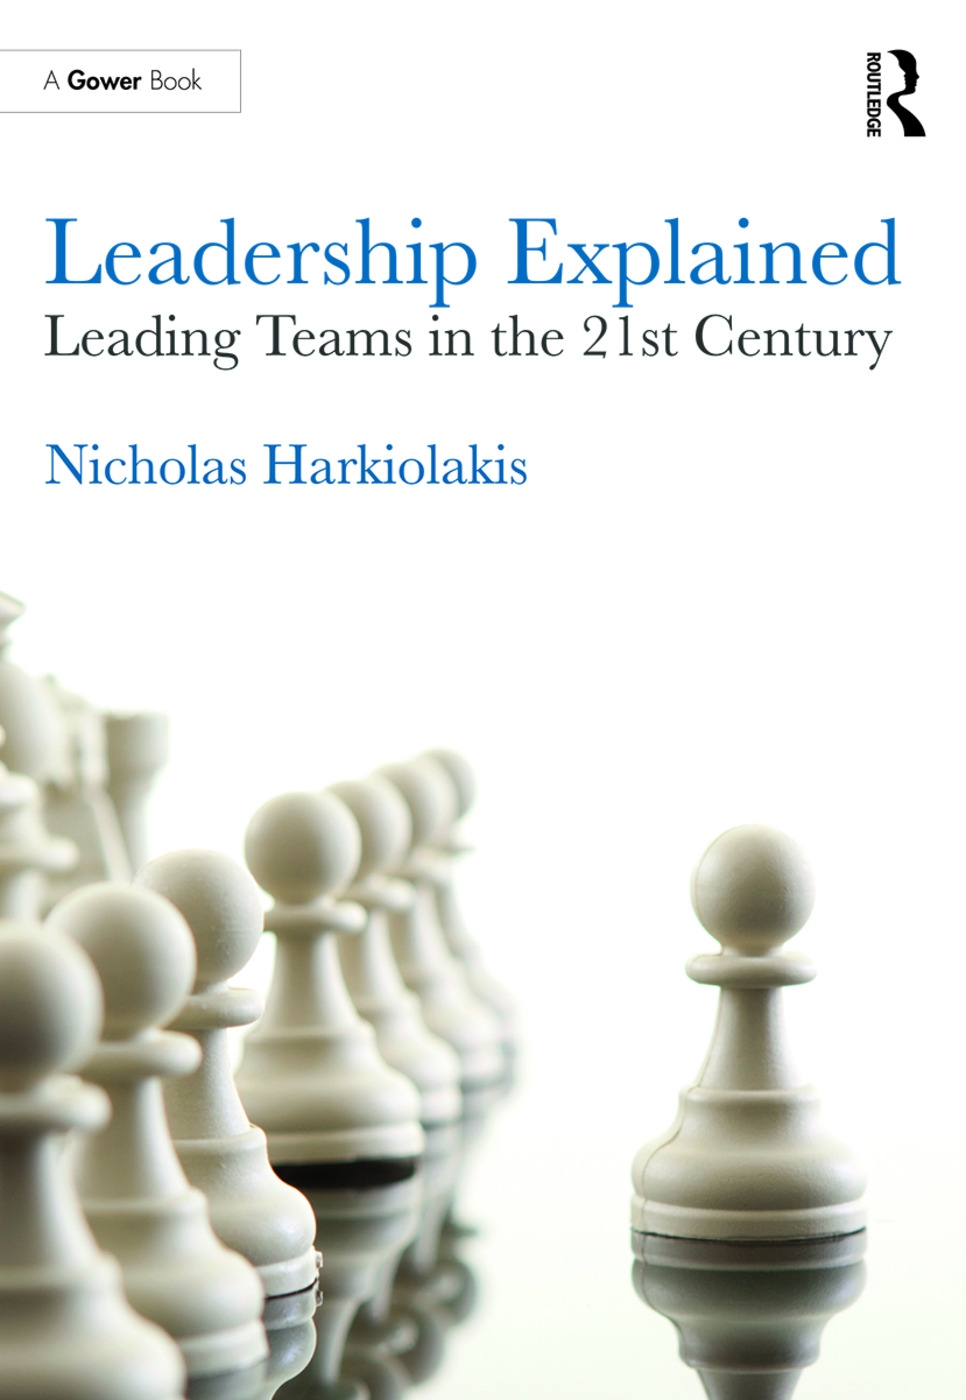 Leadership Explained: Leading Teams in the 21st Century